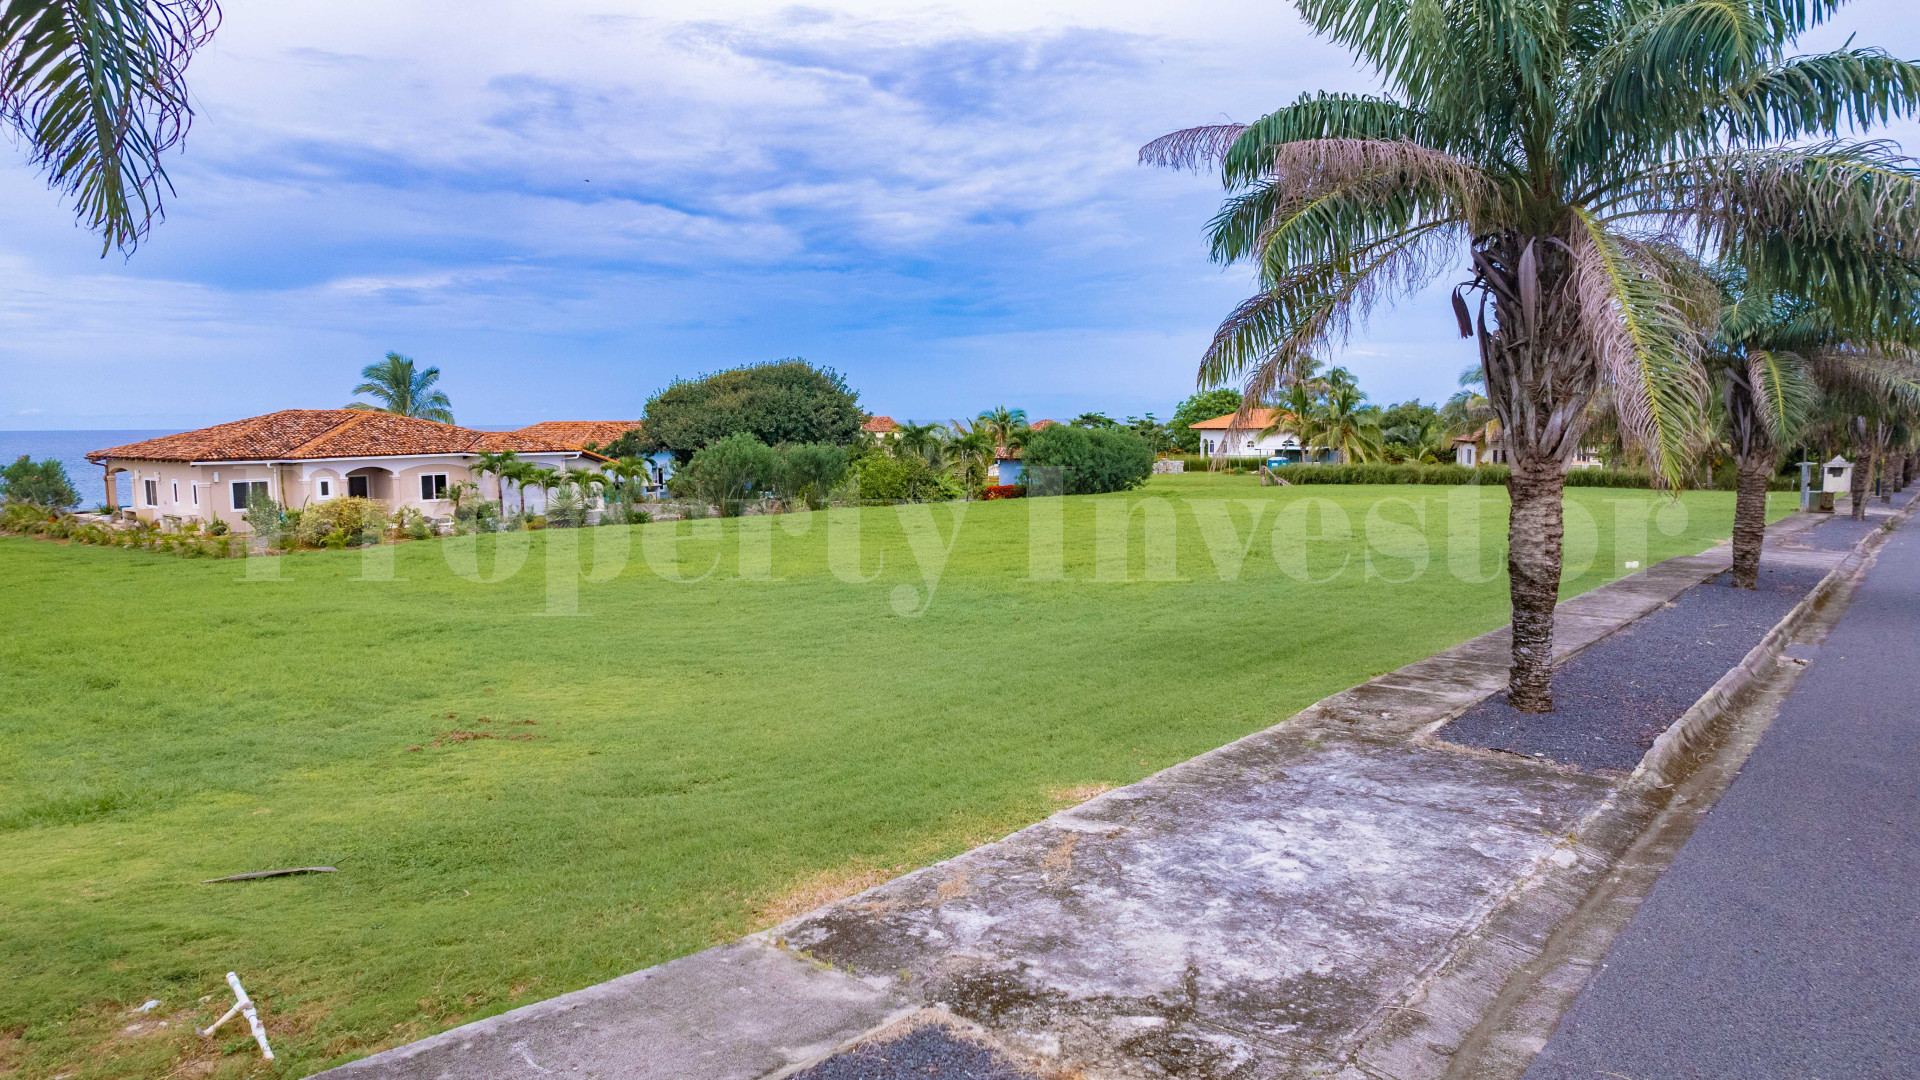 1,112-1,362 m² Ocean View Gated Community Residential Lots for Sale in Pedasi, Panama